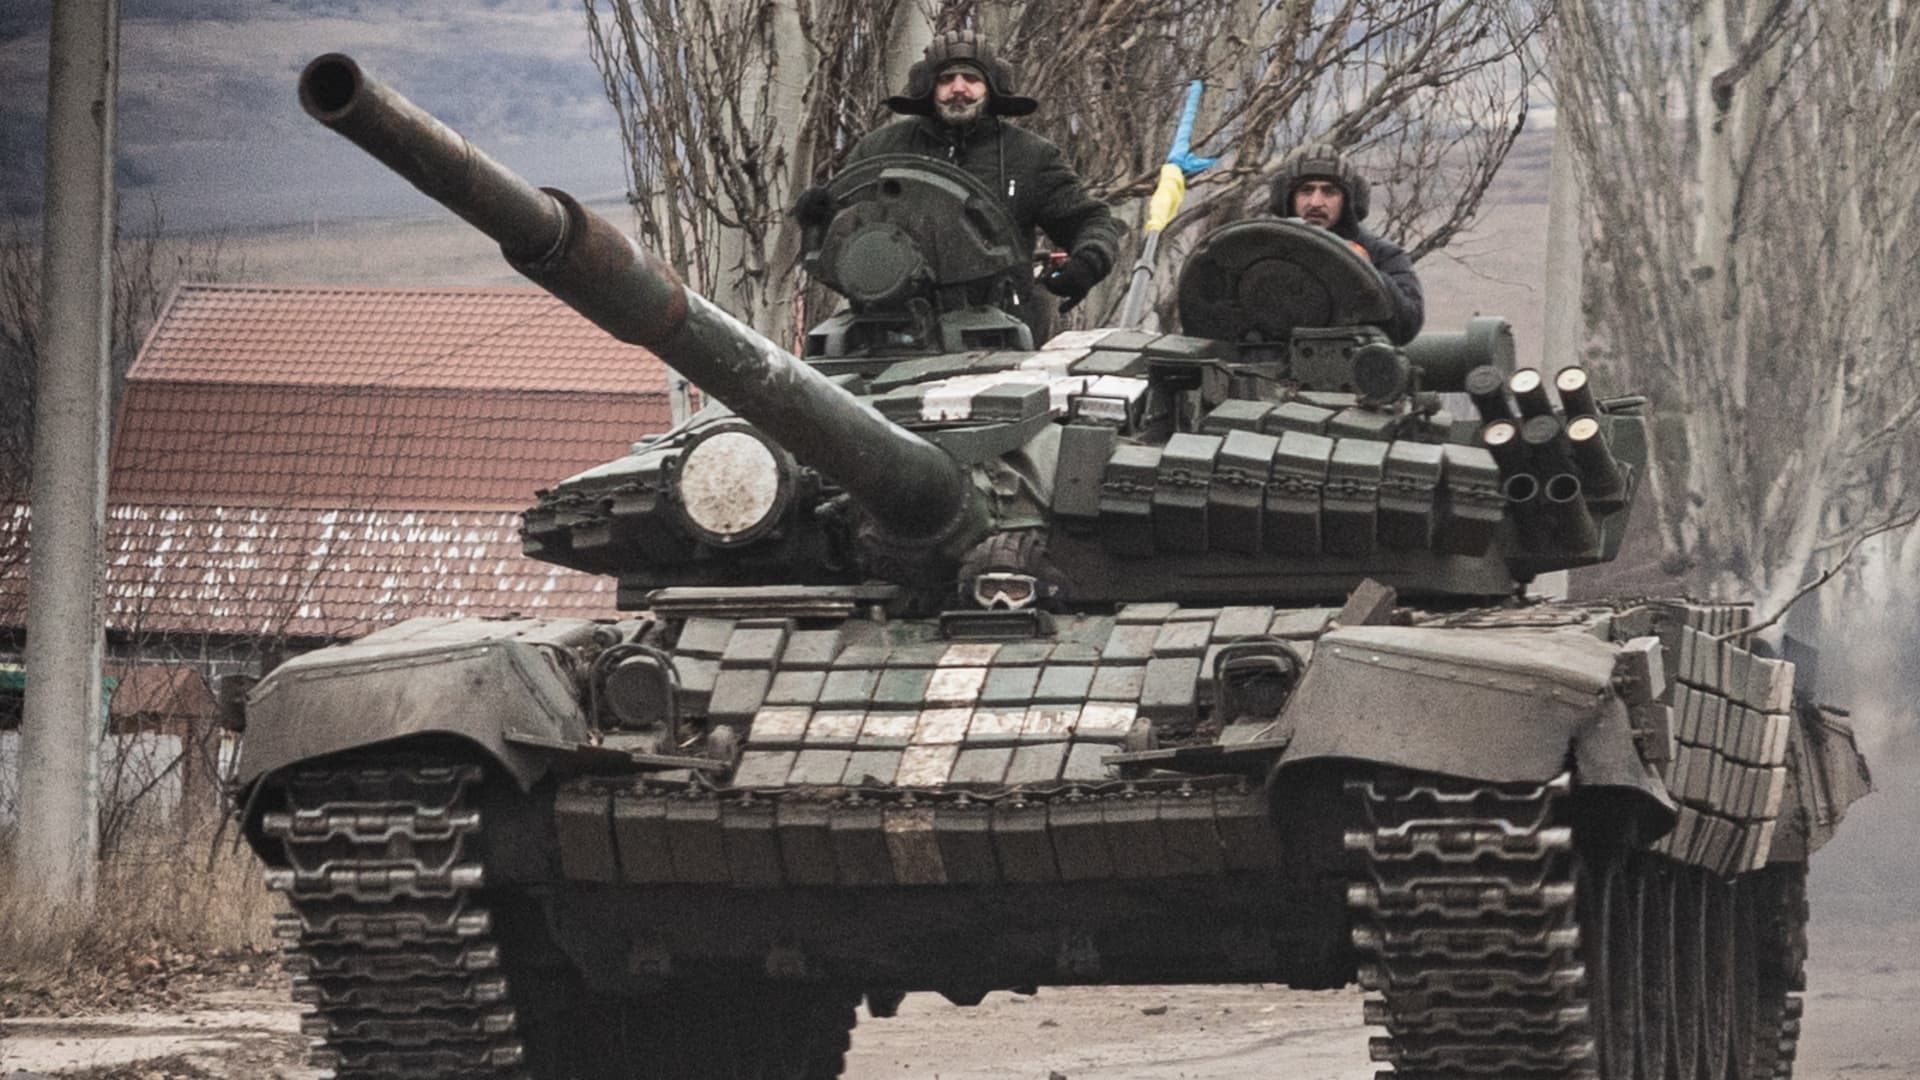 Ukrainian armed forces' soldiers drive a T-72 tank on the outskirts of Bakhmut, eastern Ukraine on December 21, 2022.